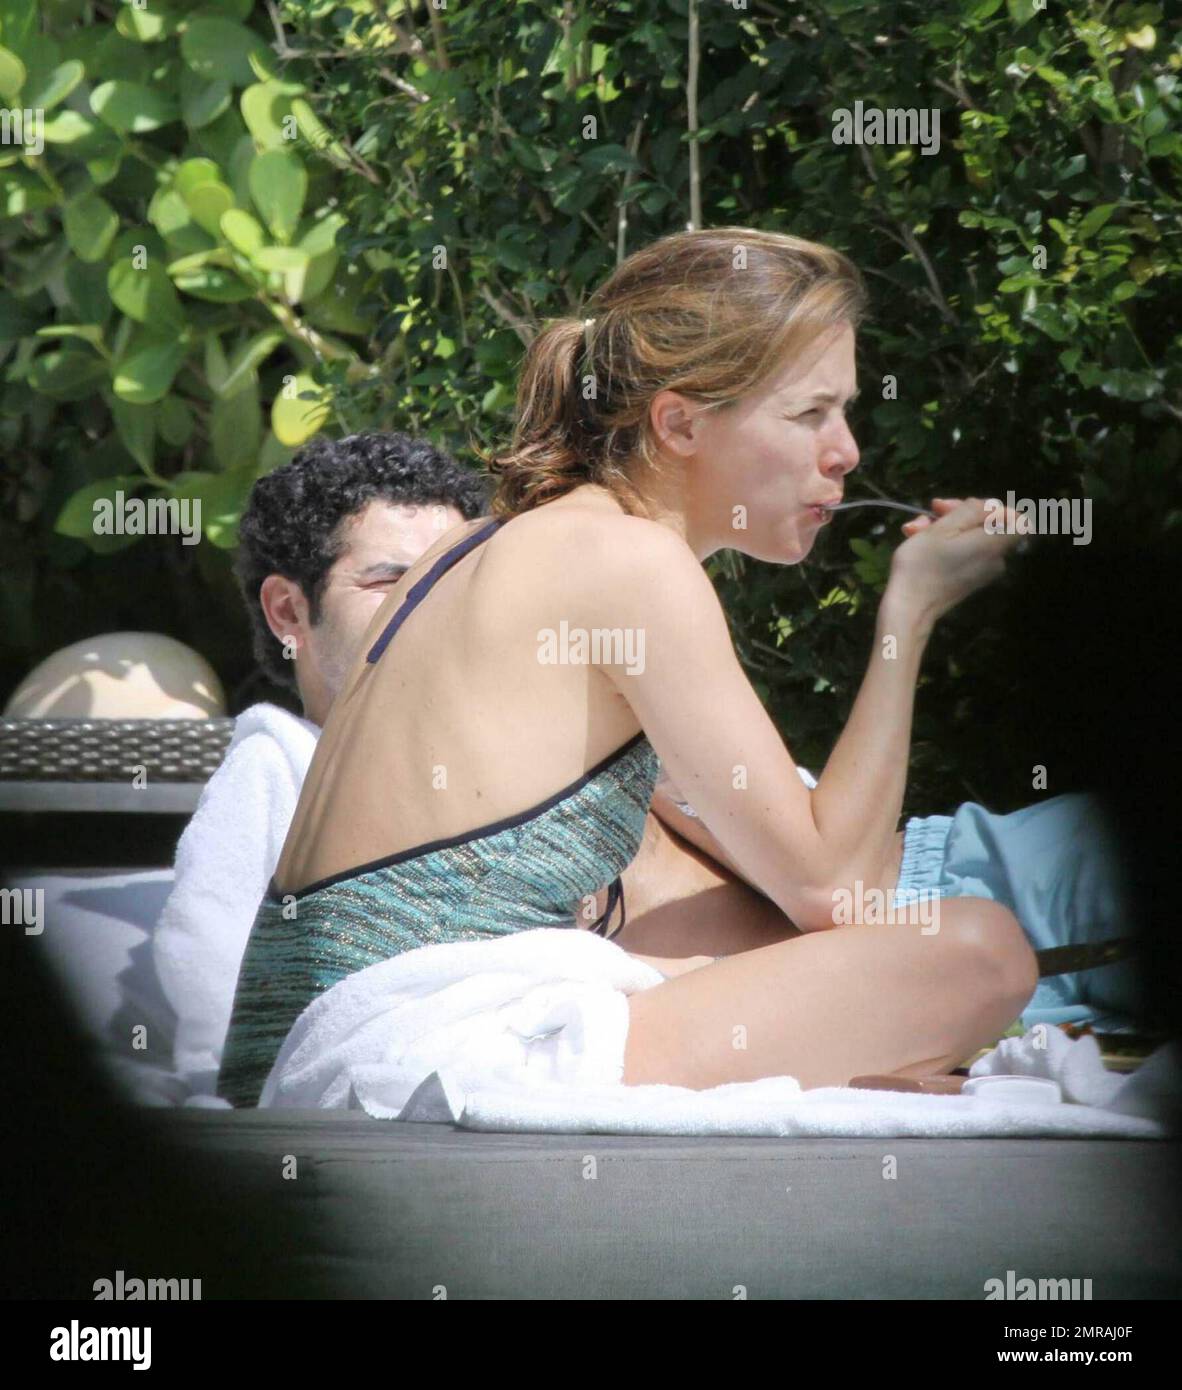 French actor Jamel Debbouze and wife Melissa Theuriau enjoy a day in the sun wearing bathing suits at their exclusive Miami Beach hotel pool.  The couple had lunch and were very intimate together, kissing and cuddling in front of hotel guests. Miami Beach, Florida. 2/23/09 Stock Photo